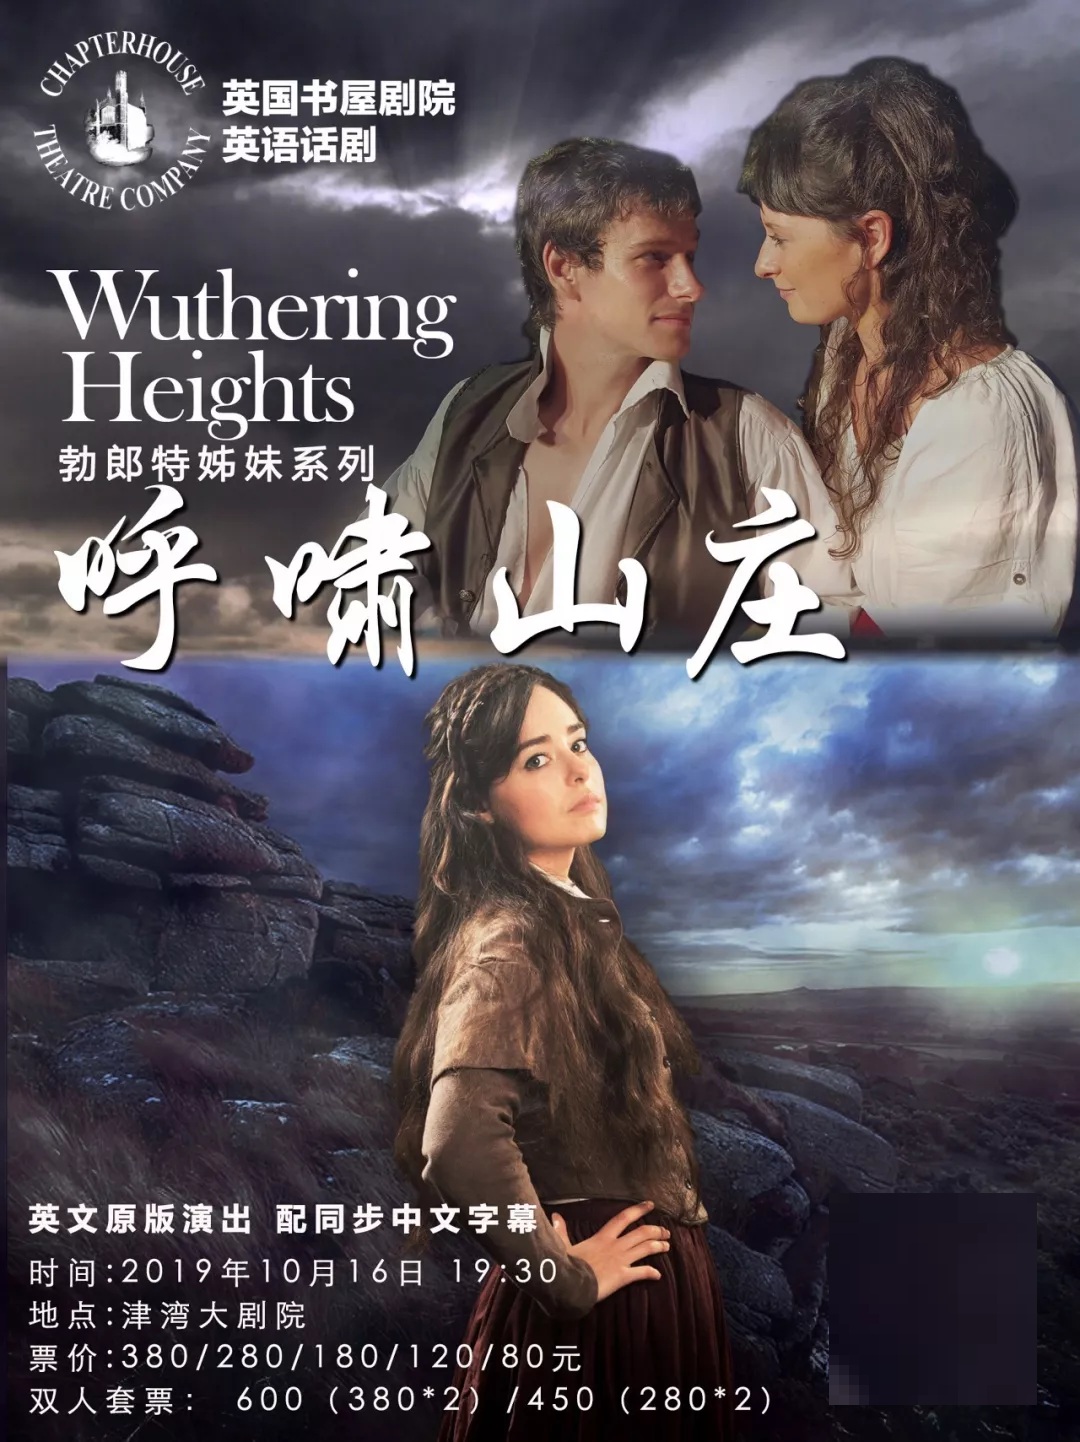 Wuthering Heights by Chapterhouse Theatre Britain